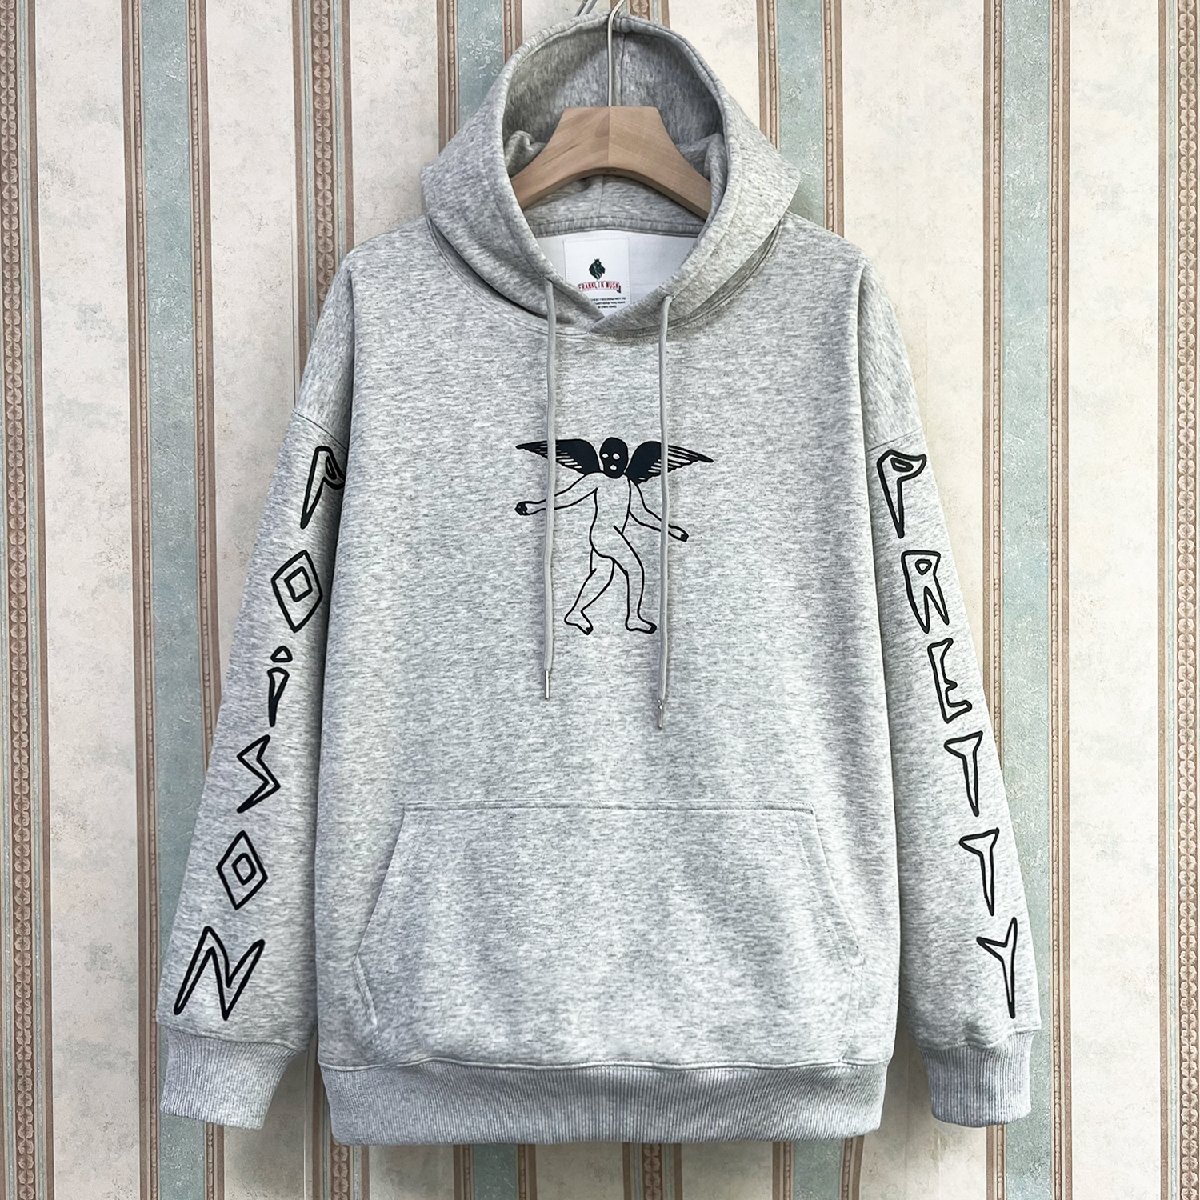  piece . regular price 4 ten thousand FRANKLIN MUSK* America * New York departure Parker comfortable waterproof illustration pull over sweat leisure everyday put on size 3